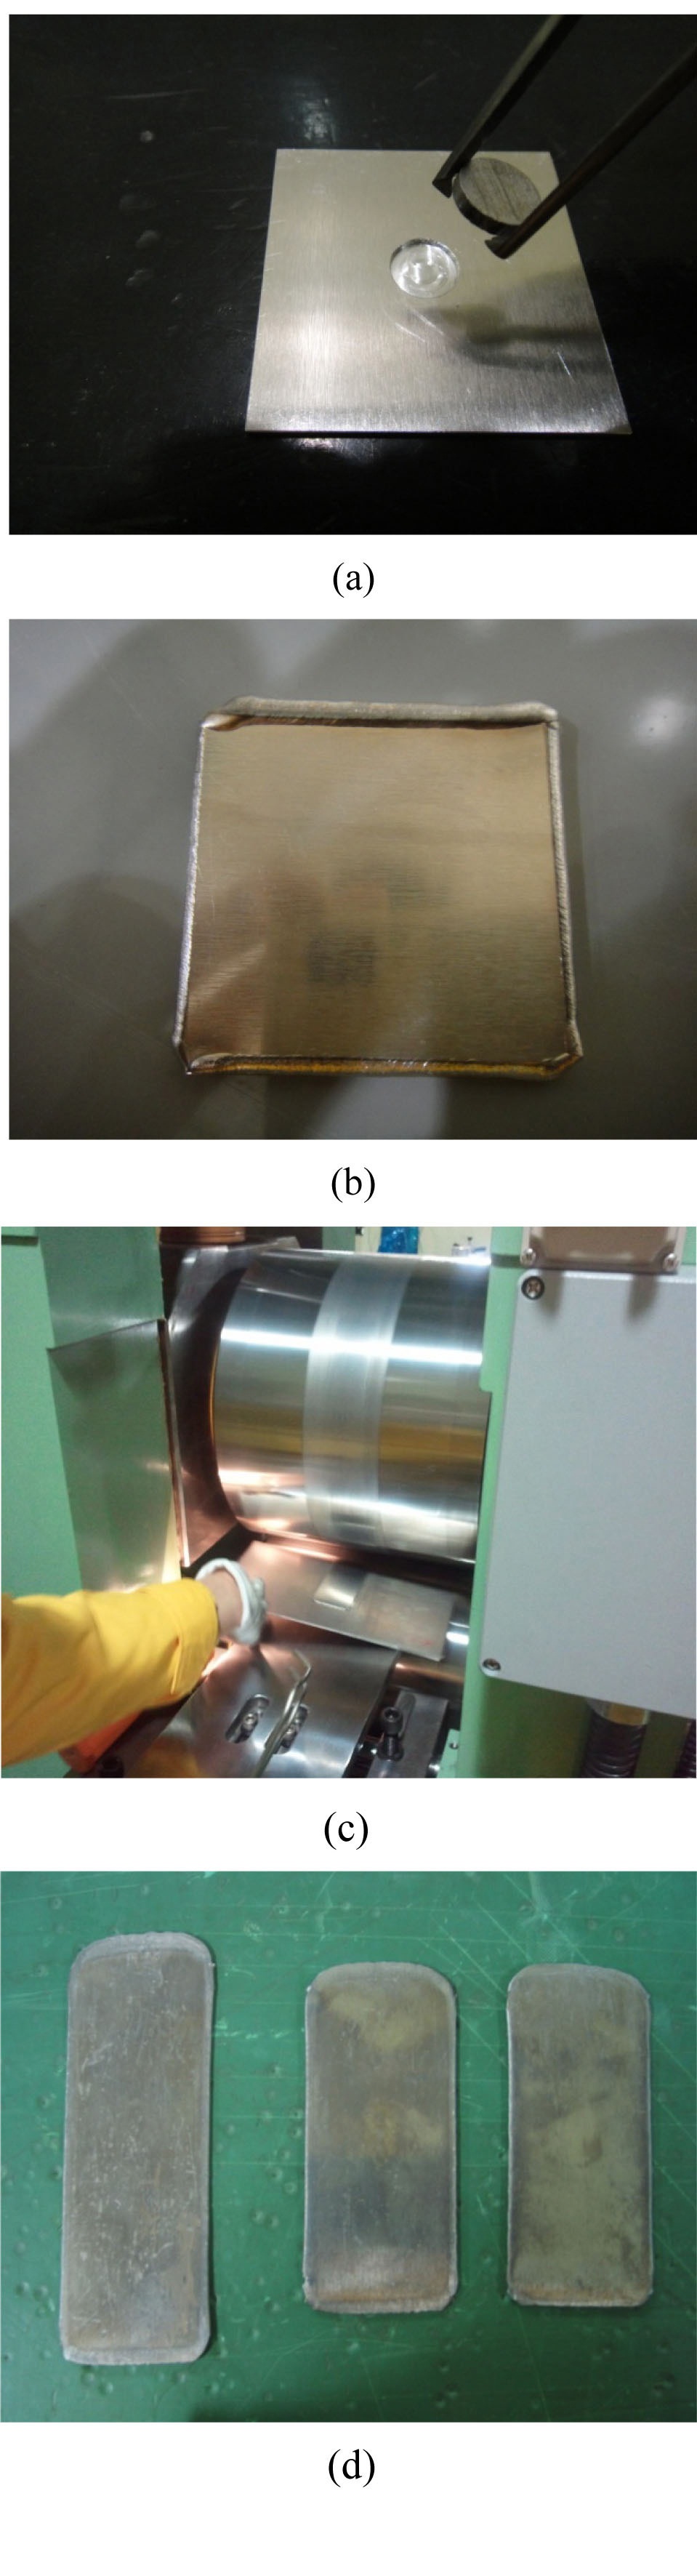 Fabrication Procedures of Miniature Dispersion Targets; (a) Insertion a U/Al Dispersion Compact into an Al Cover Plate, (b) Electron Beam Welding of Sandwiched Al Cover Plates, (c) Hot Rolling of Welded Plates, (d) Hot Rolled Plates.